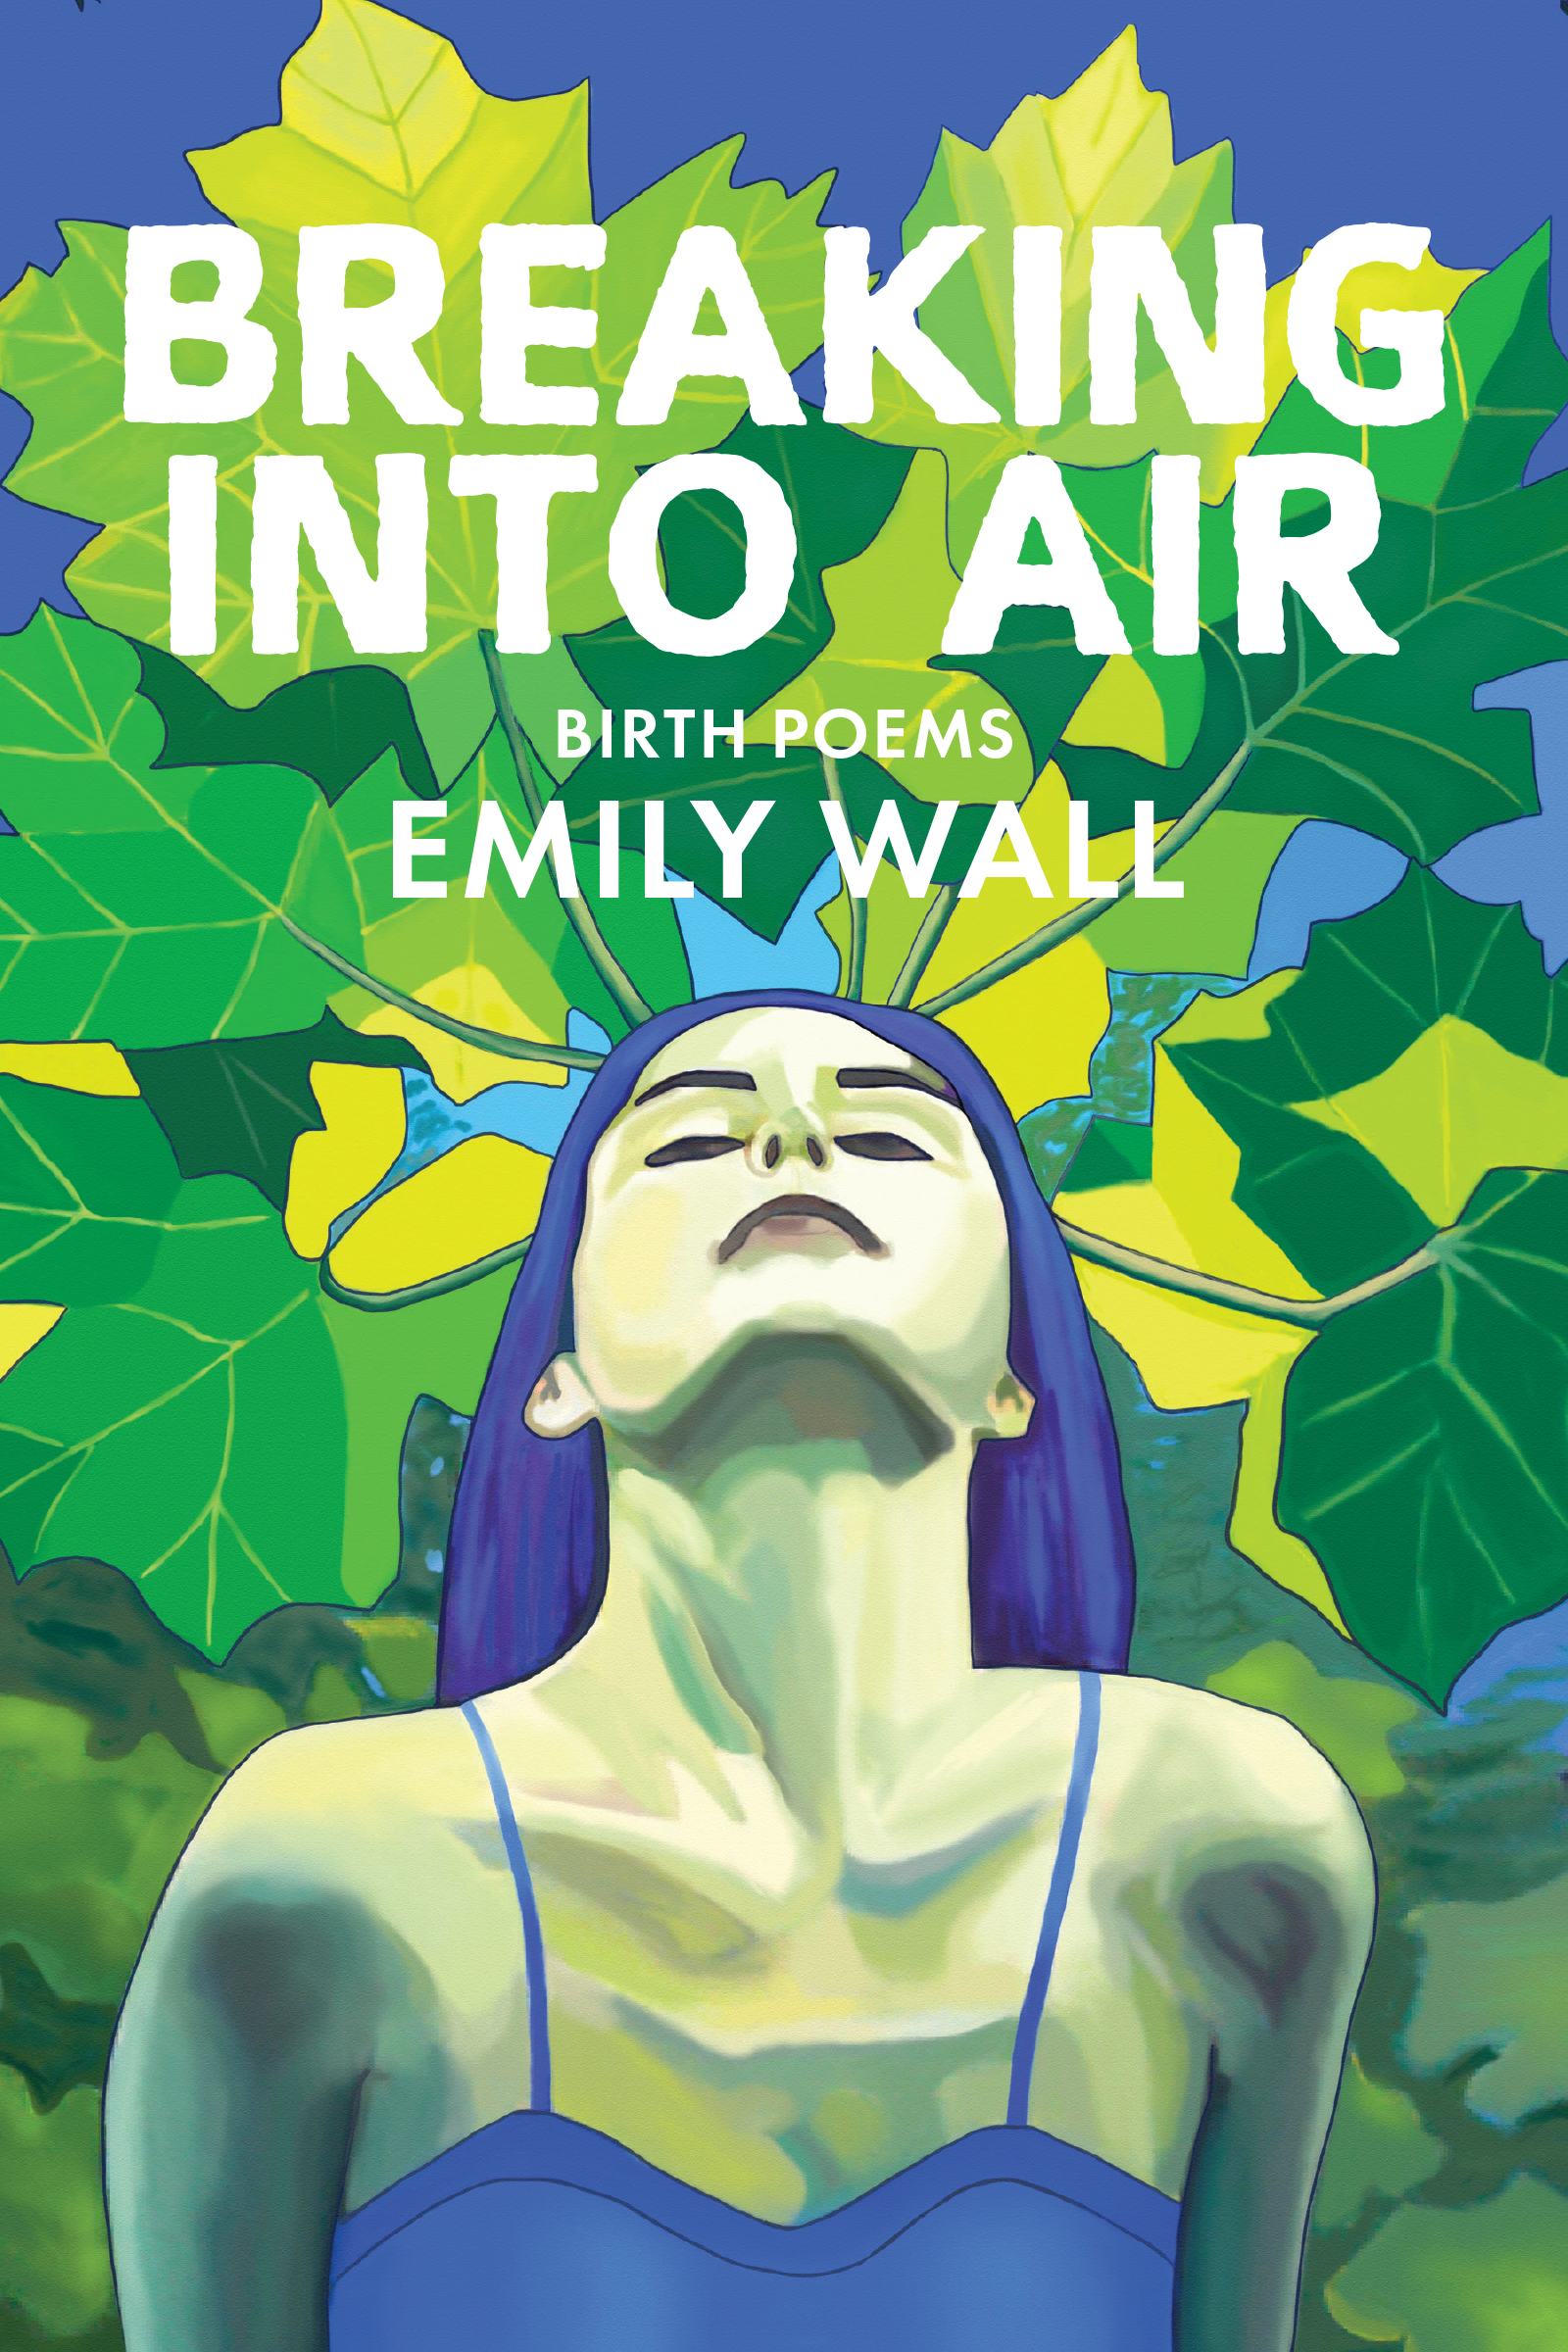 Cover shows a woman from the torso up looking upwards. The woman is wearing a tanktop. Behind her are green maple leaves.